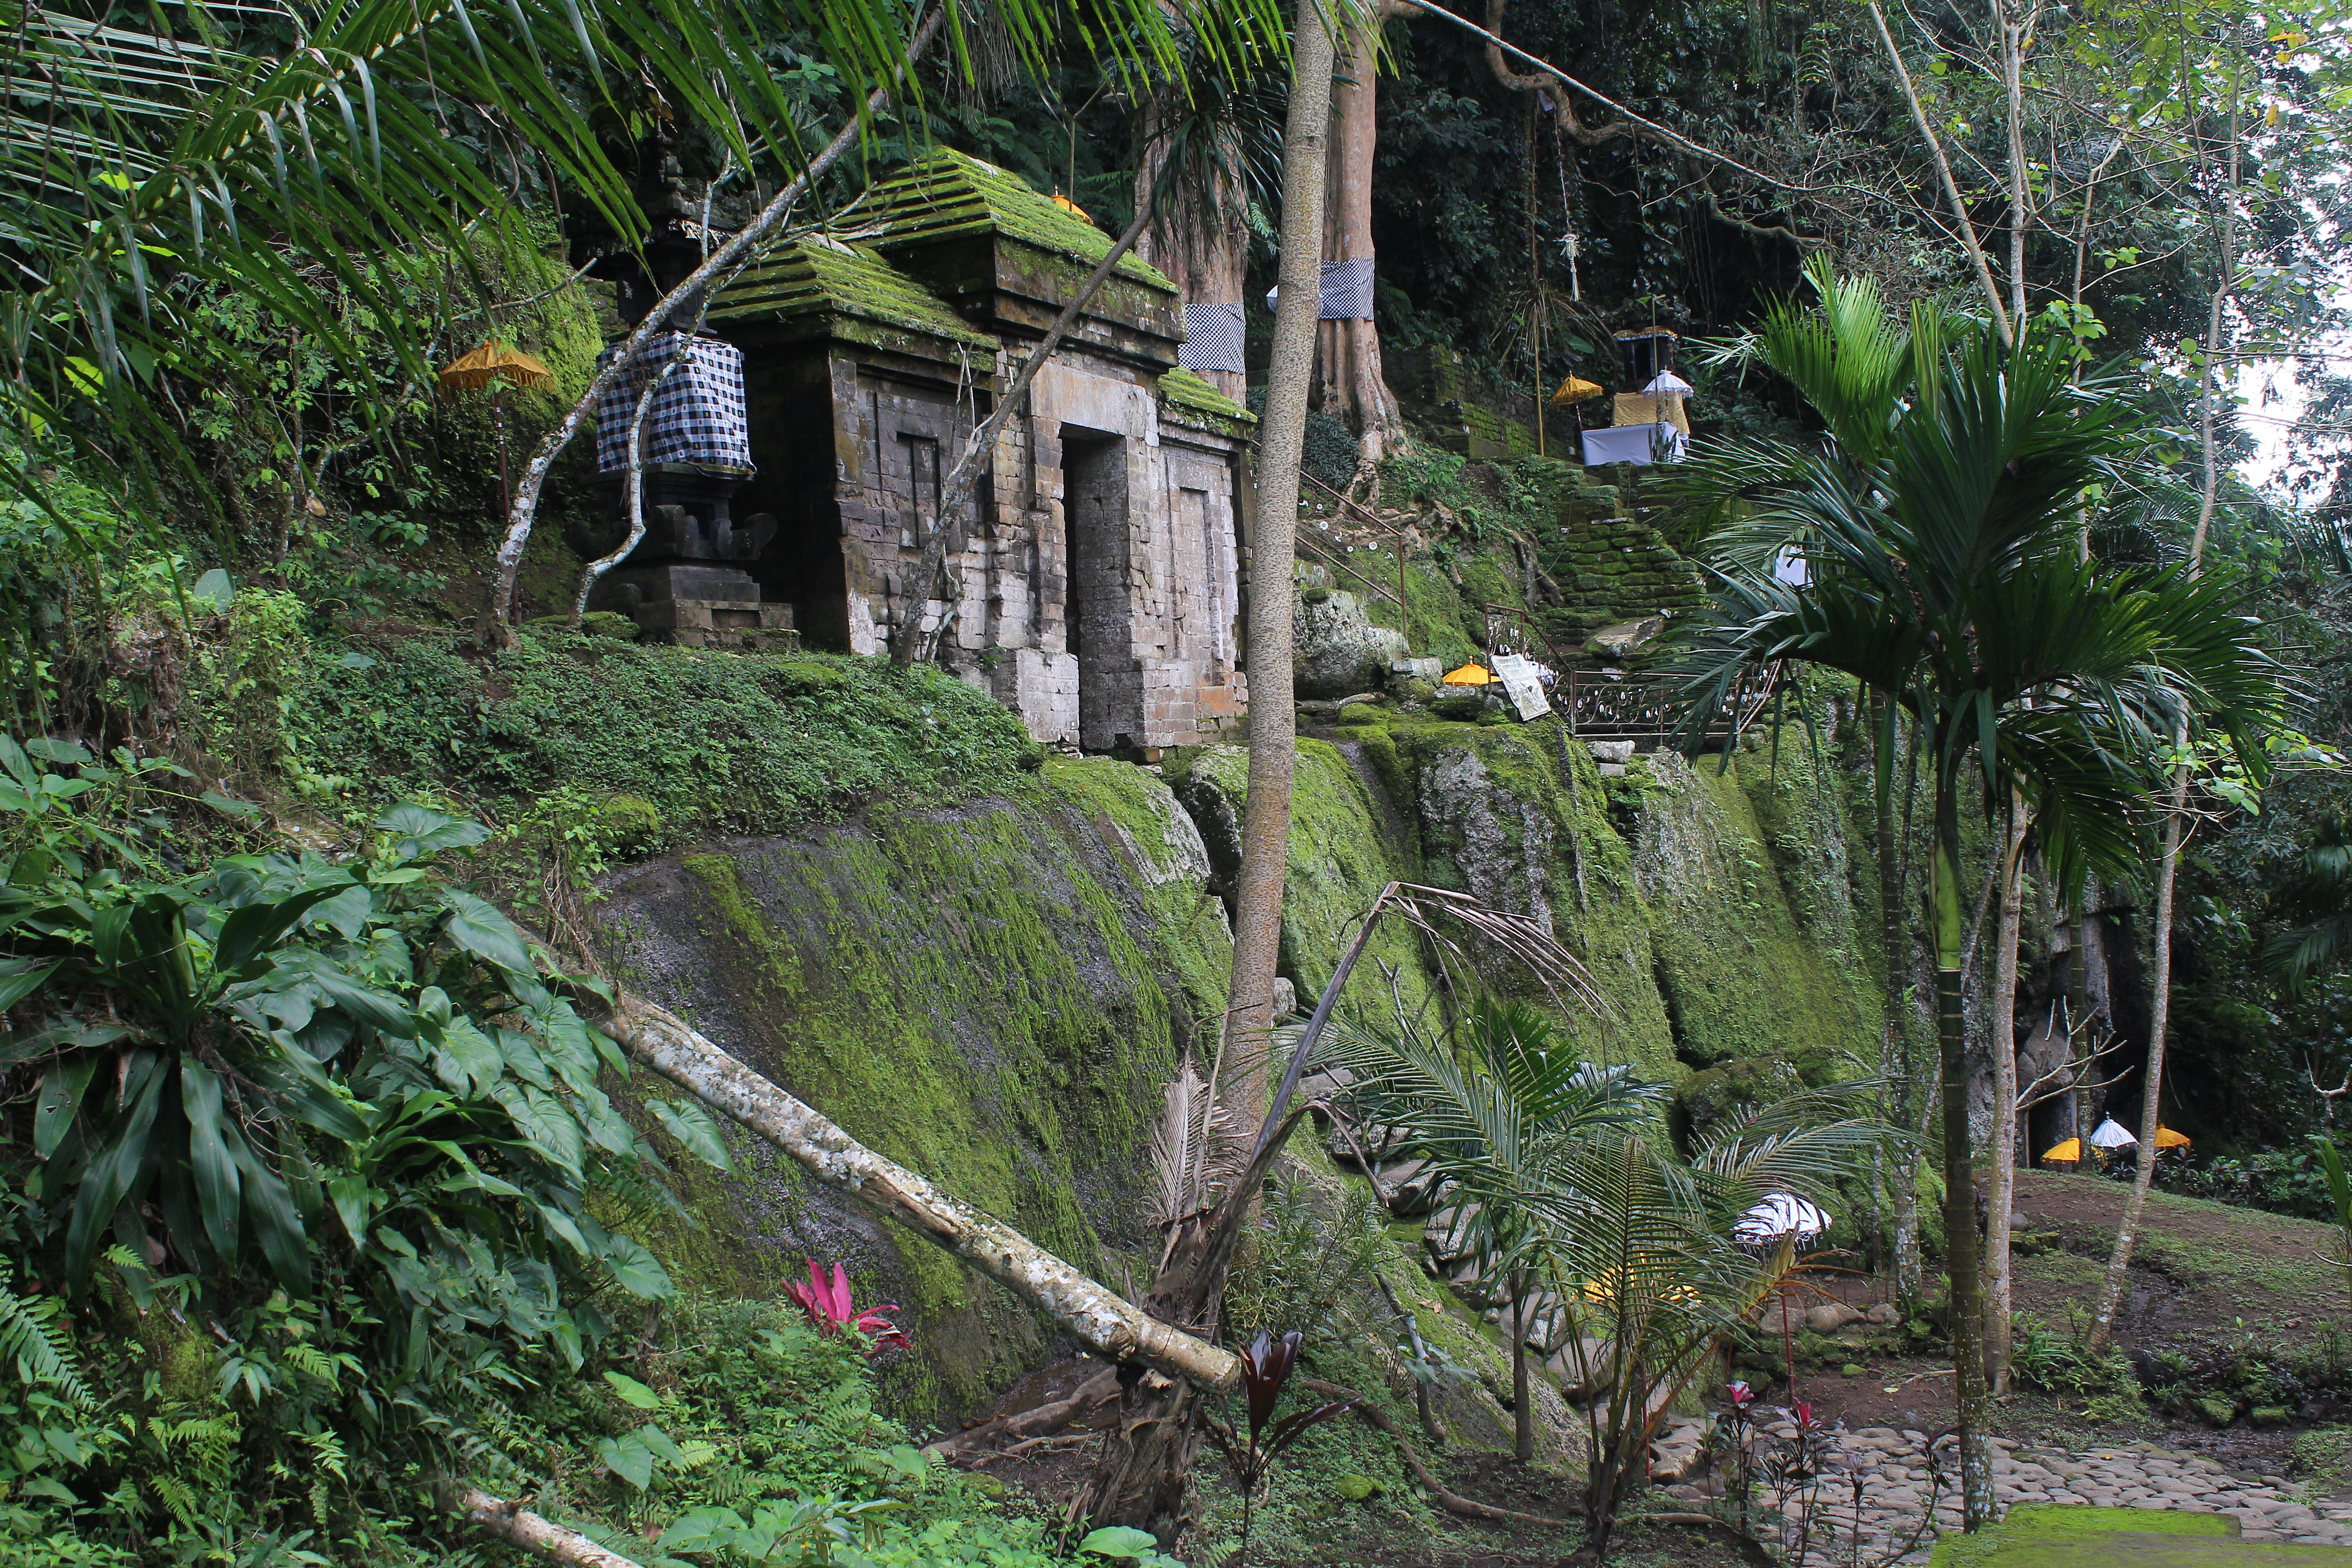 In the jungle, a flight of rock-cut stairs leading up to a gate and shrine complex, with yellow and white umbrellas